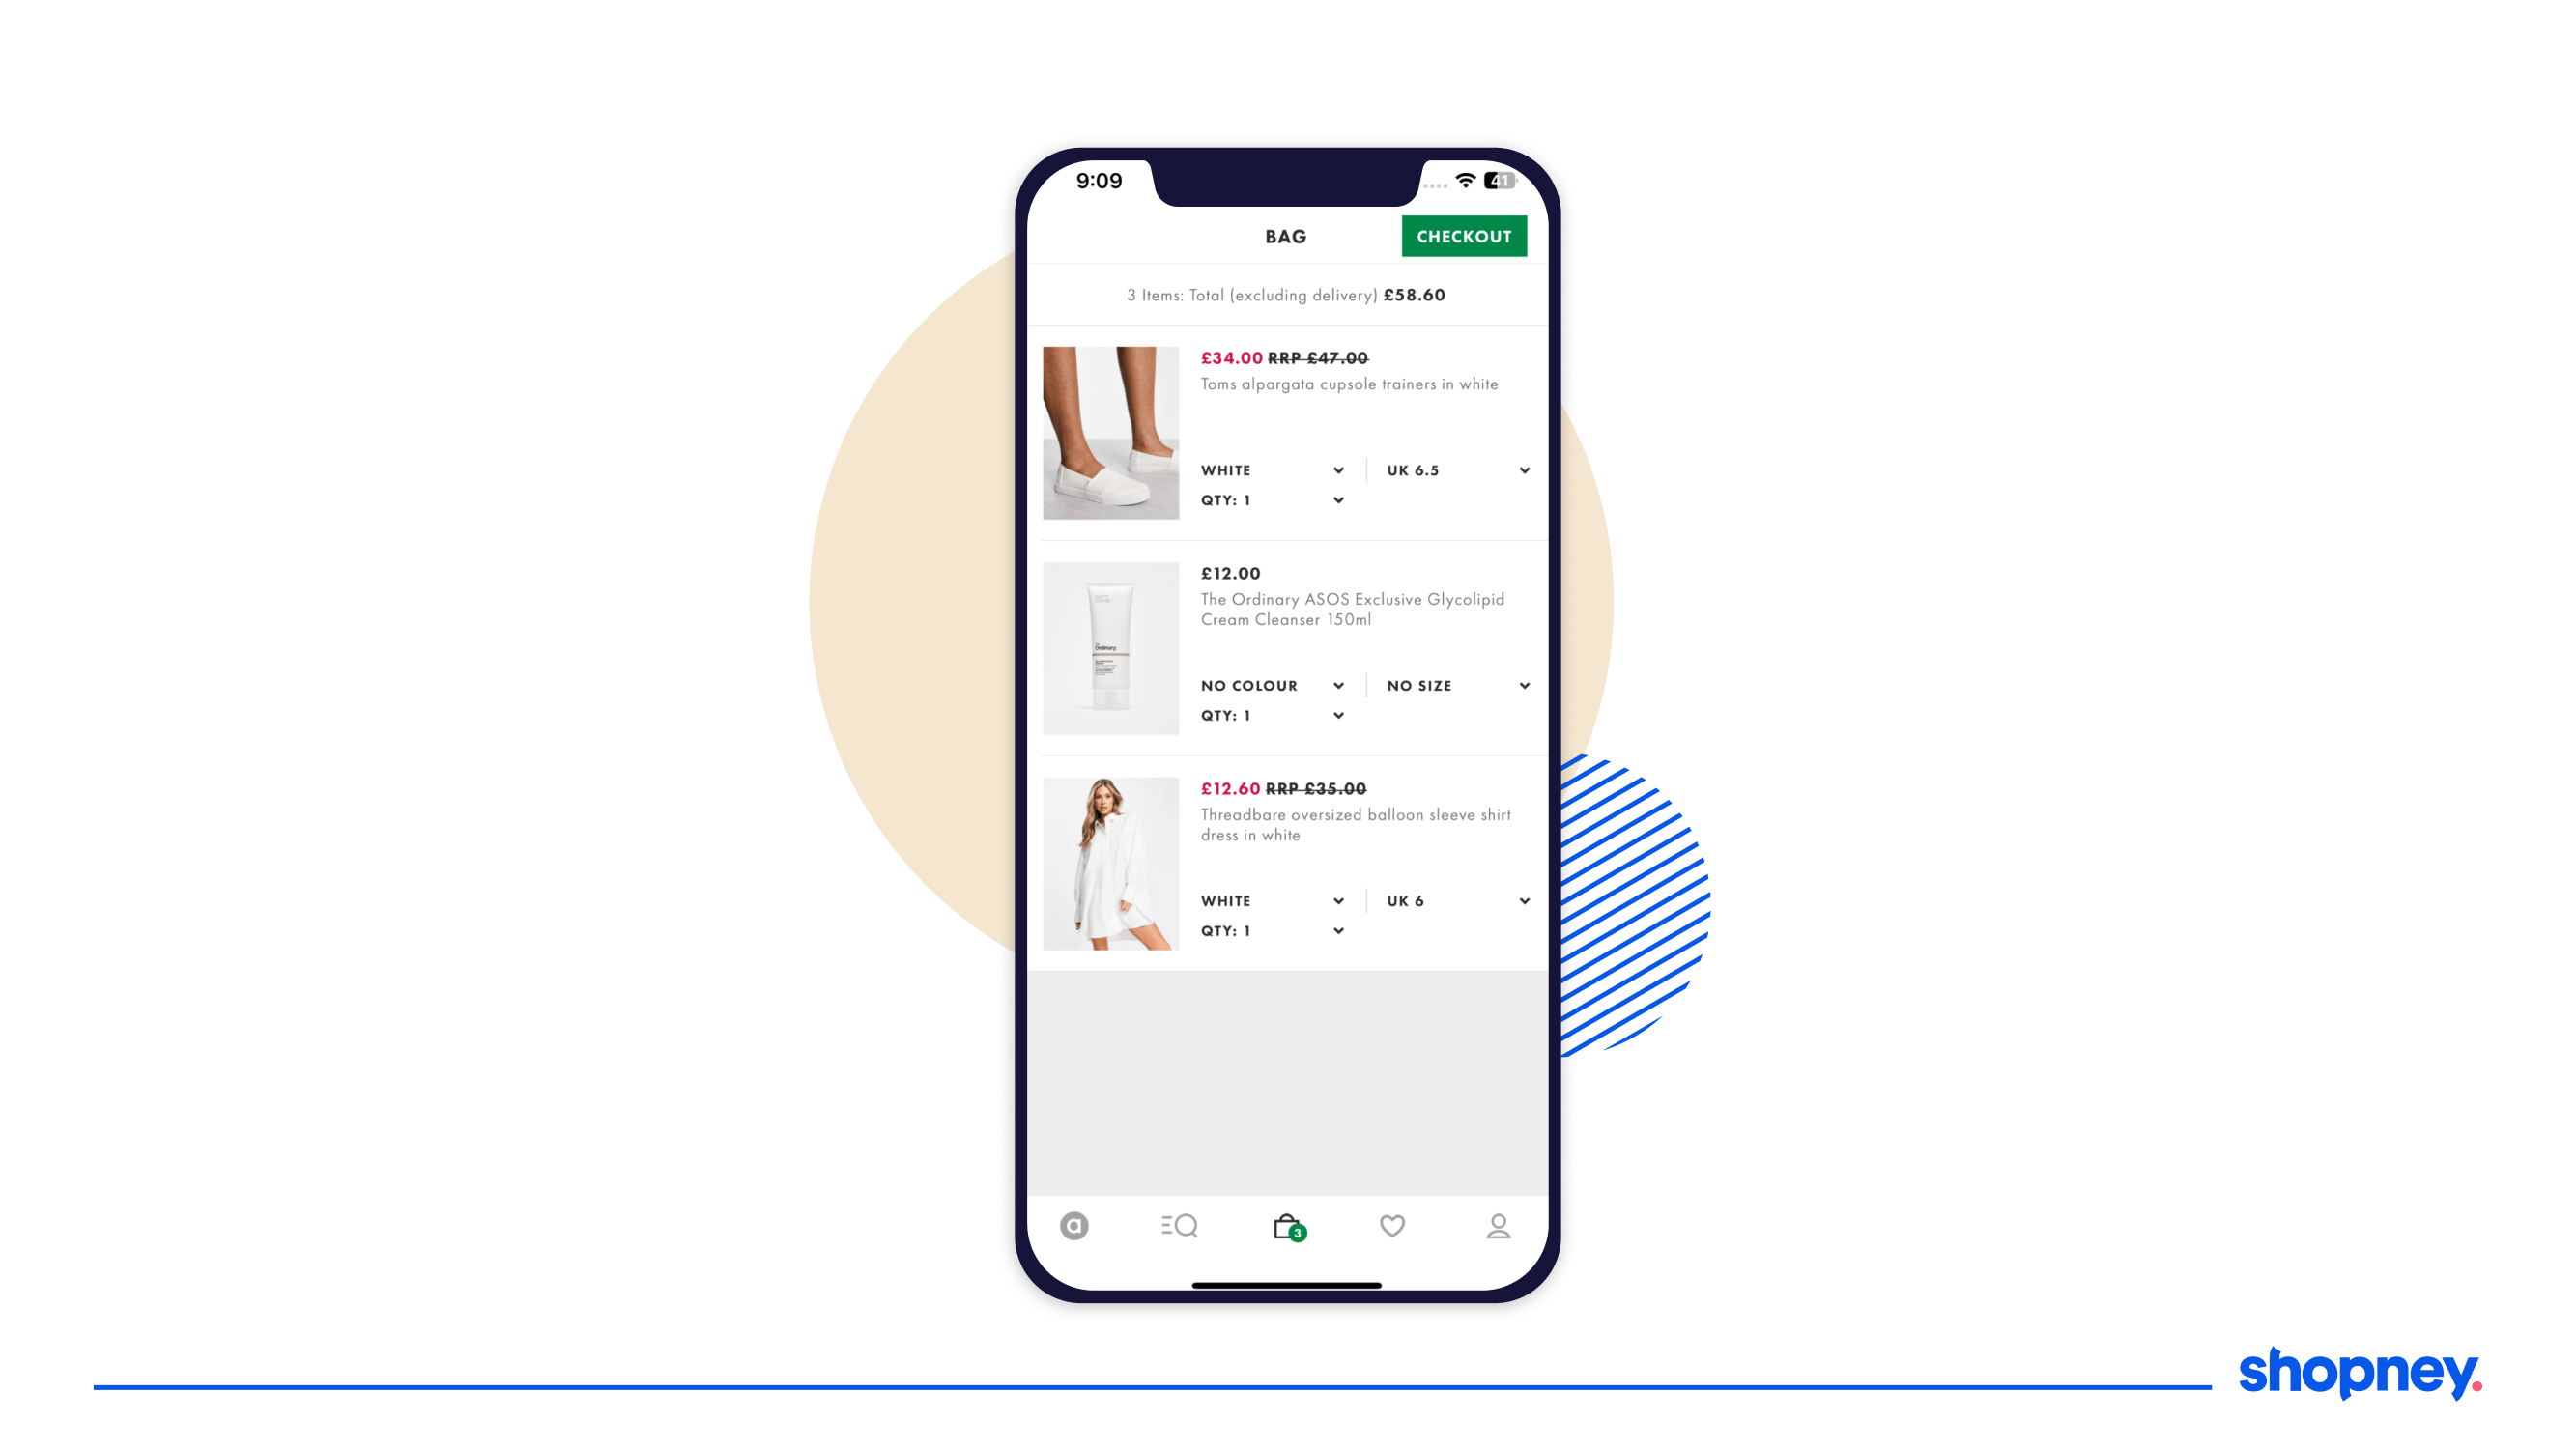 Displaying savings on each item on the mobile app